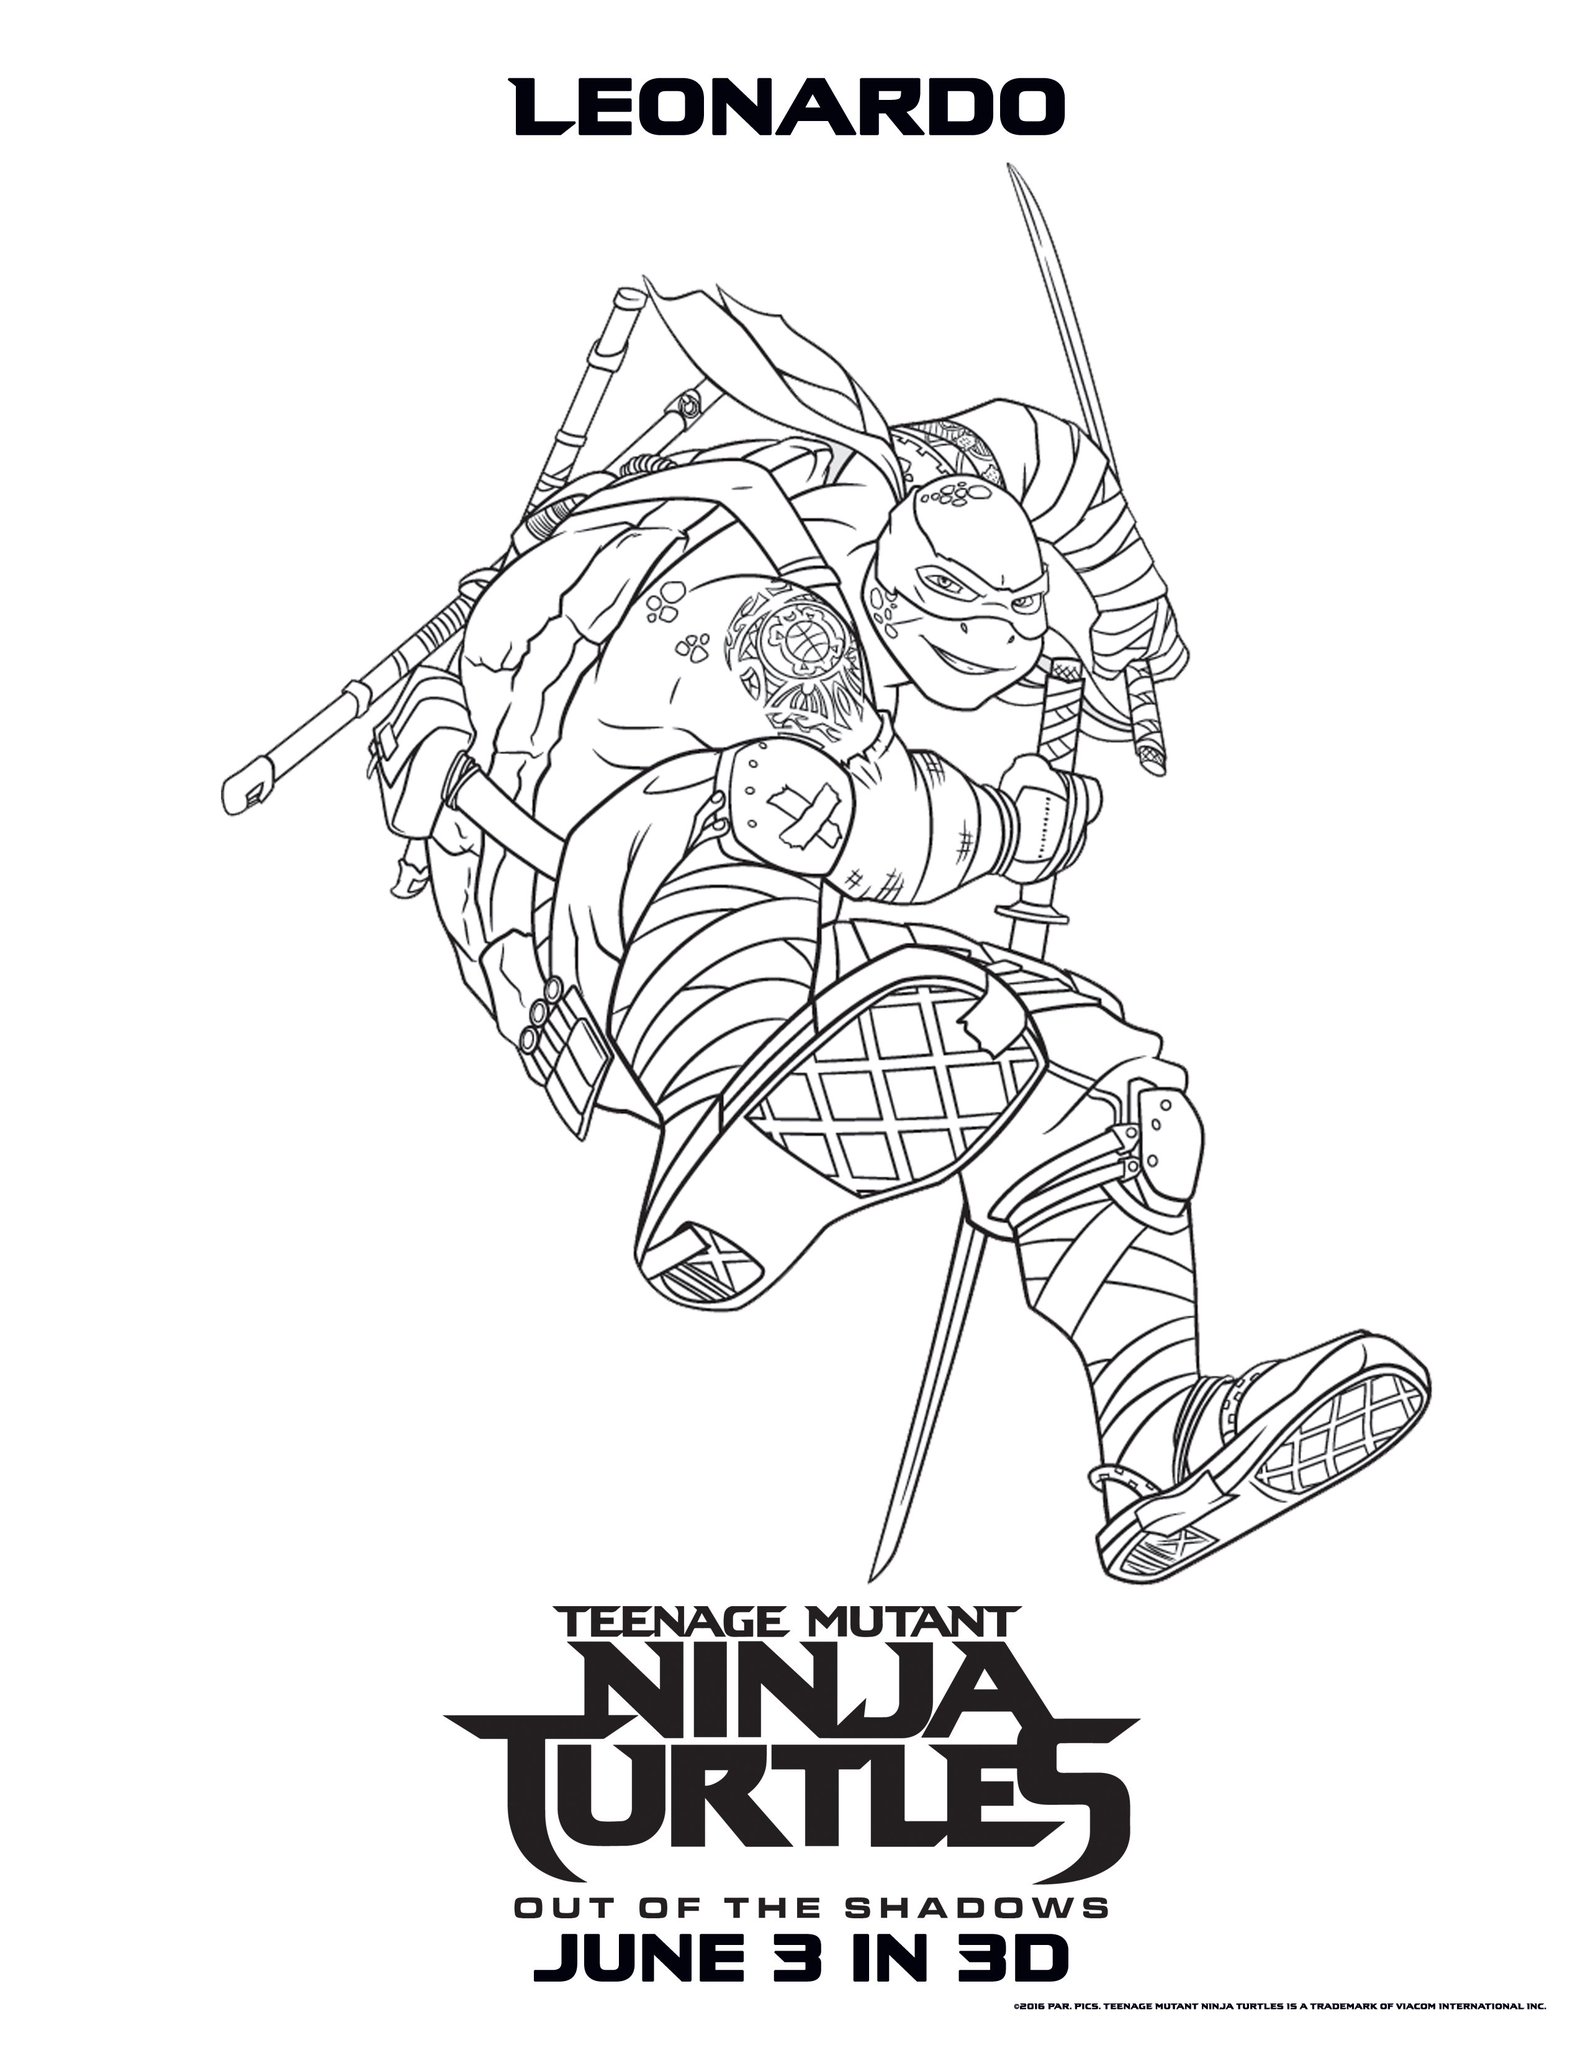 438 Unicorn Rise Of The Teenage Mutant Ninja Turtles Coloring Pages with Animal character